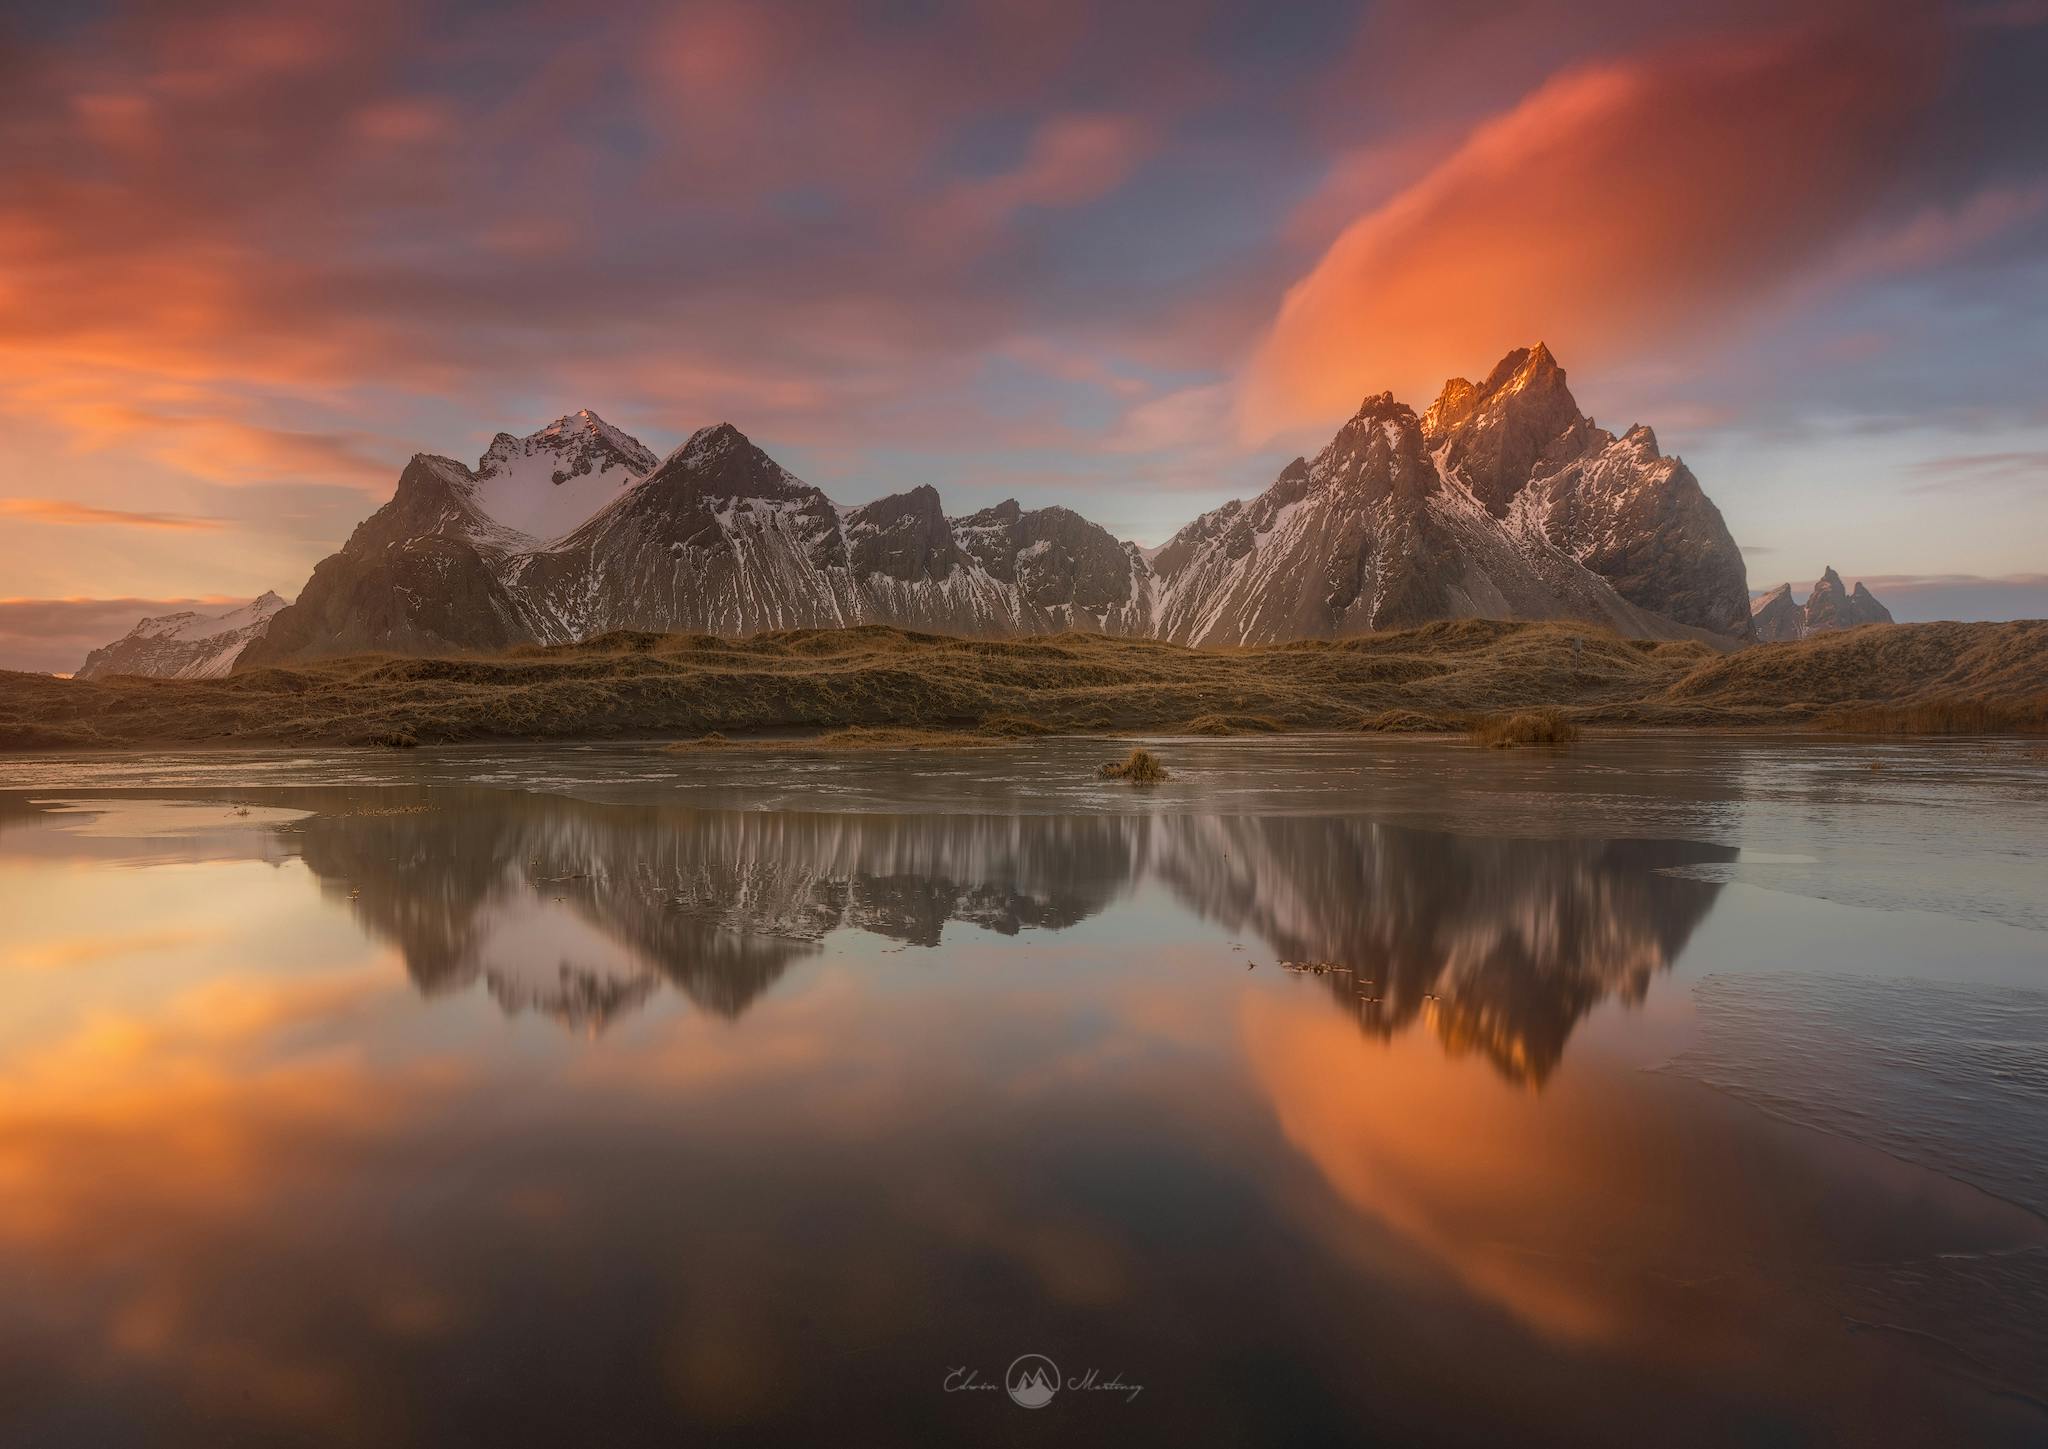 Vestrahorn is one of the most iconic mountains in Iceland.